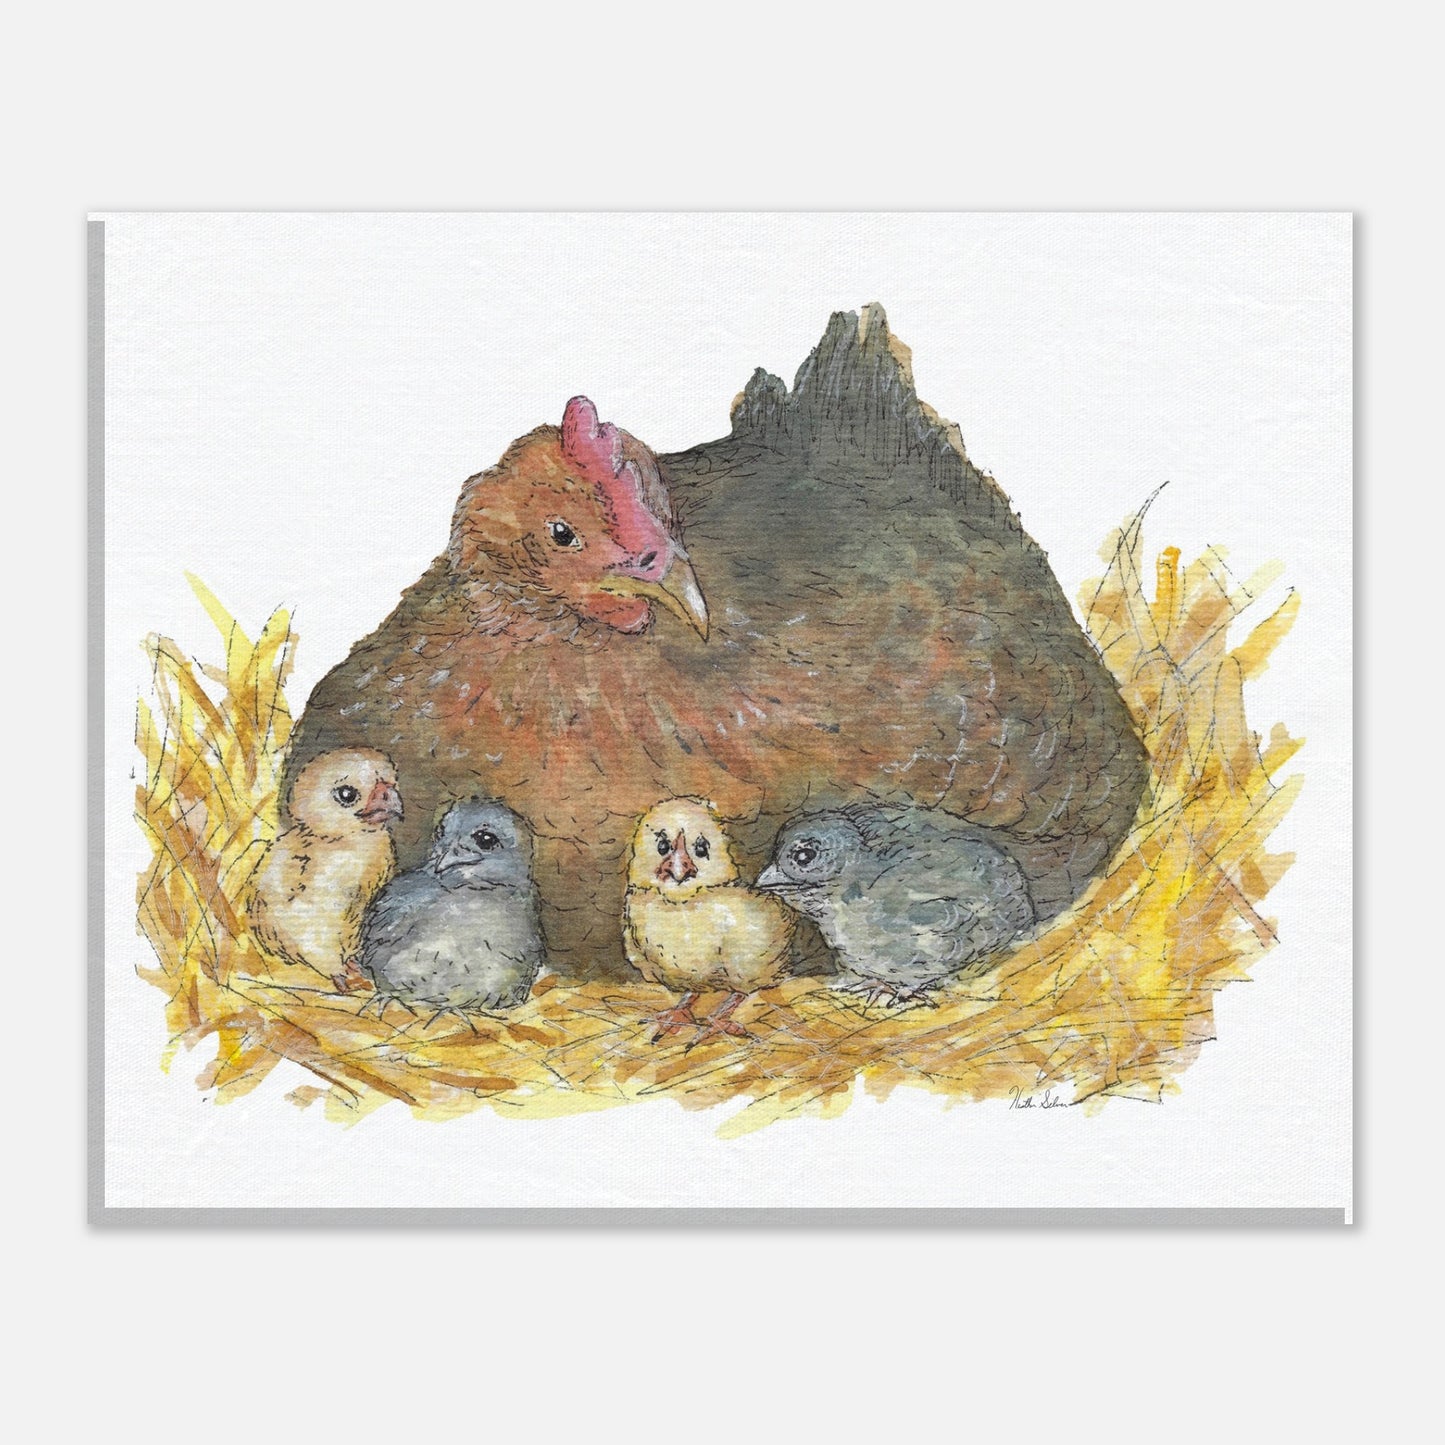 16 by 20 inch slim canvas Mother Hen print. Features a watercolor mother hen and her four chicks in a nest.